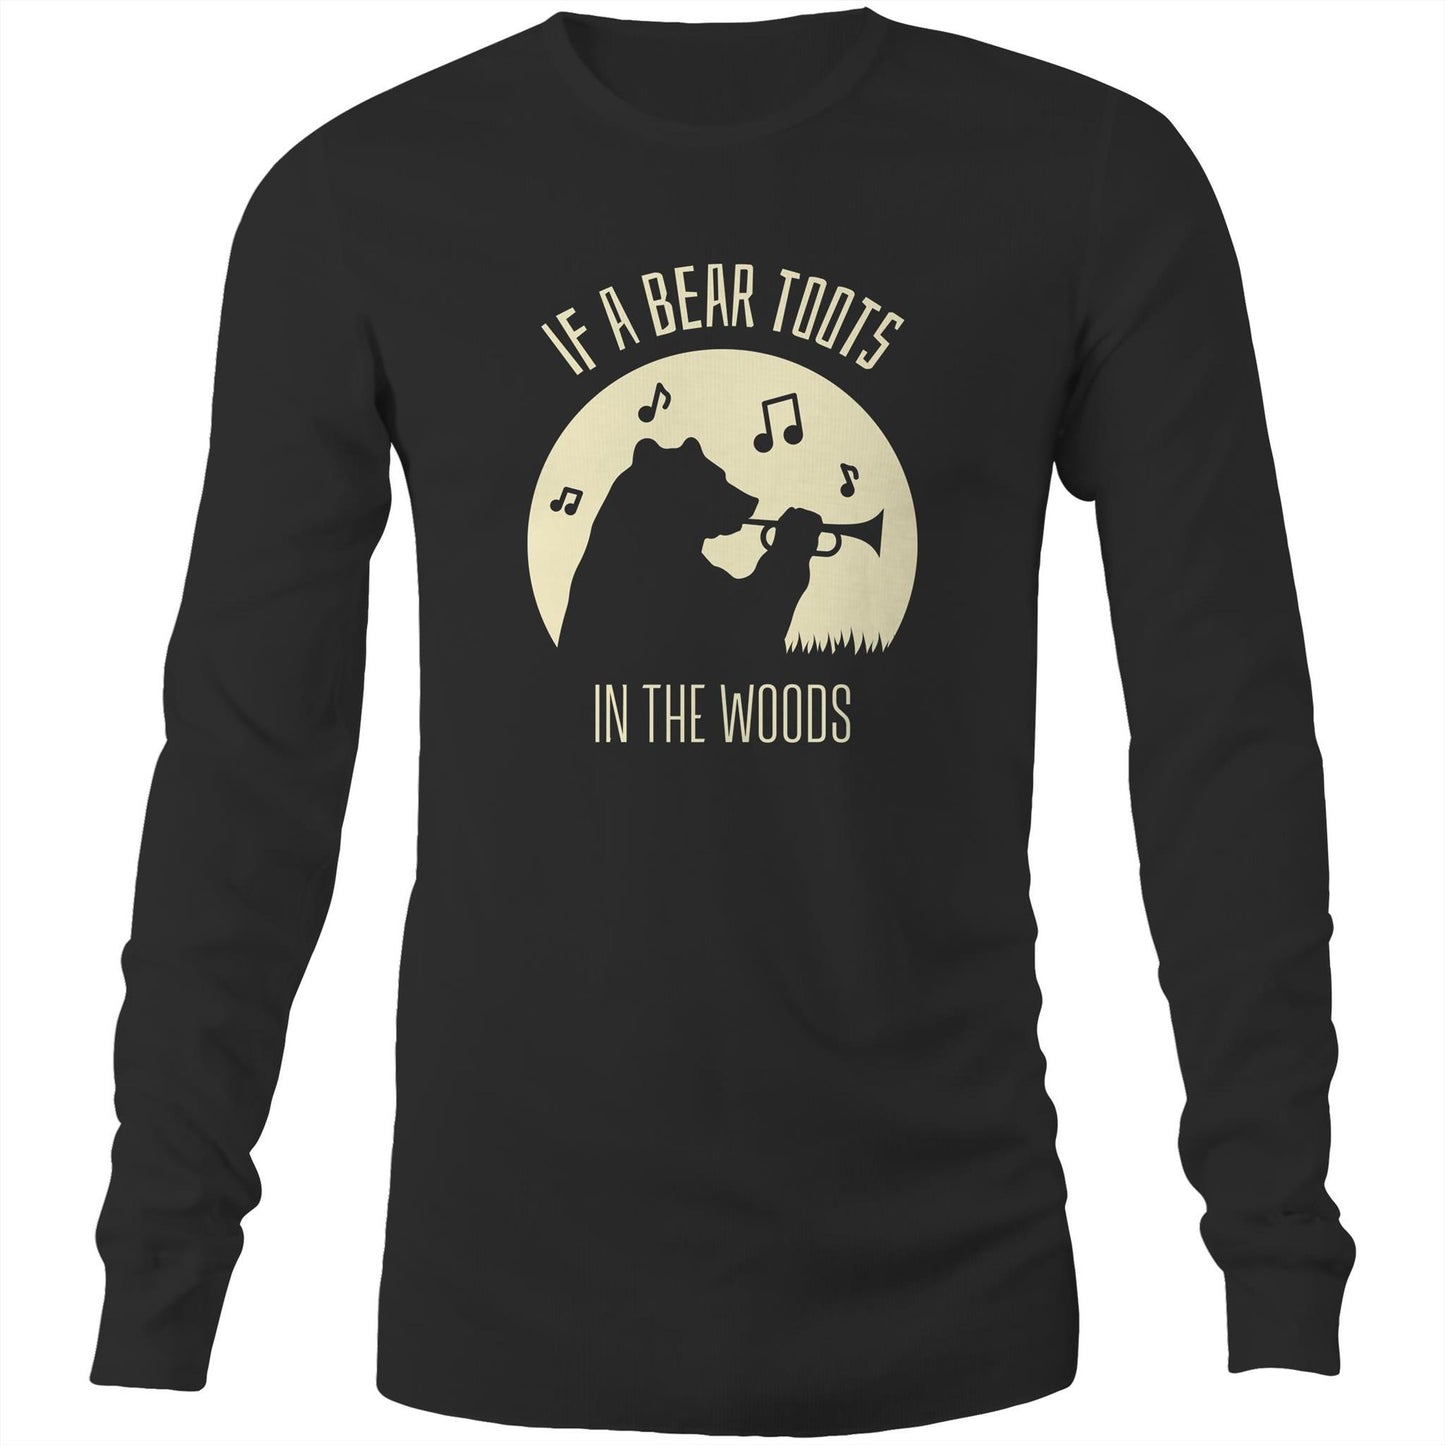 If A Bear Toots In The Woods, Trumpet Player - Long Sleeve T-Shirt Black Unisex Long Sleeve T-shirt animal Music